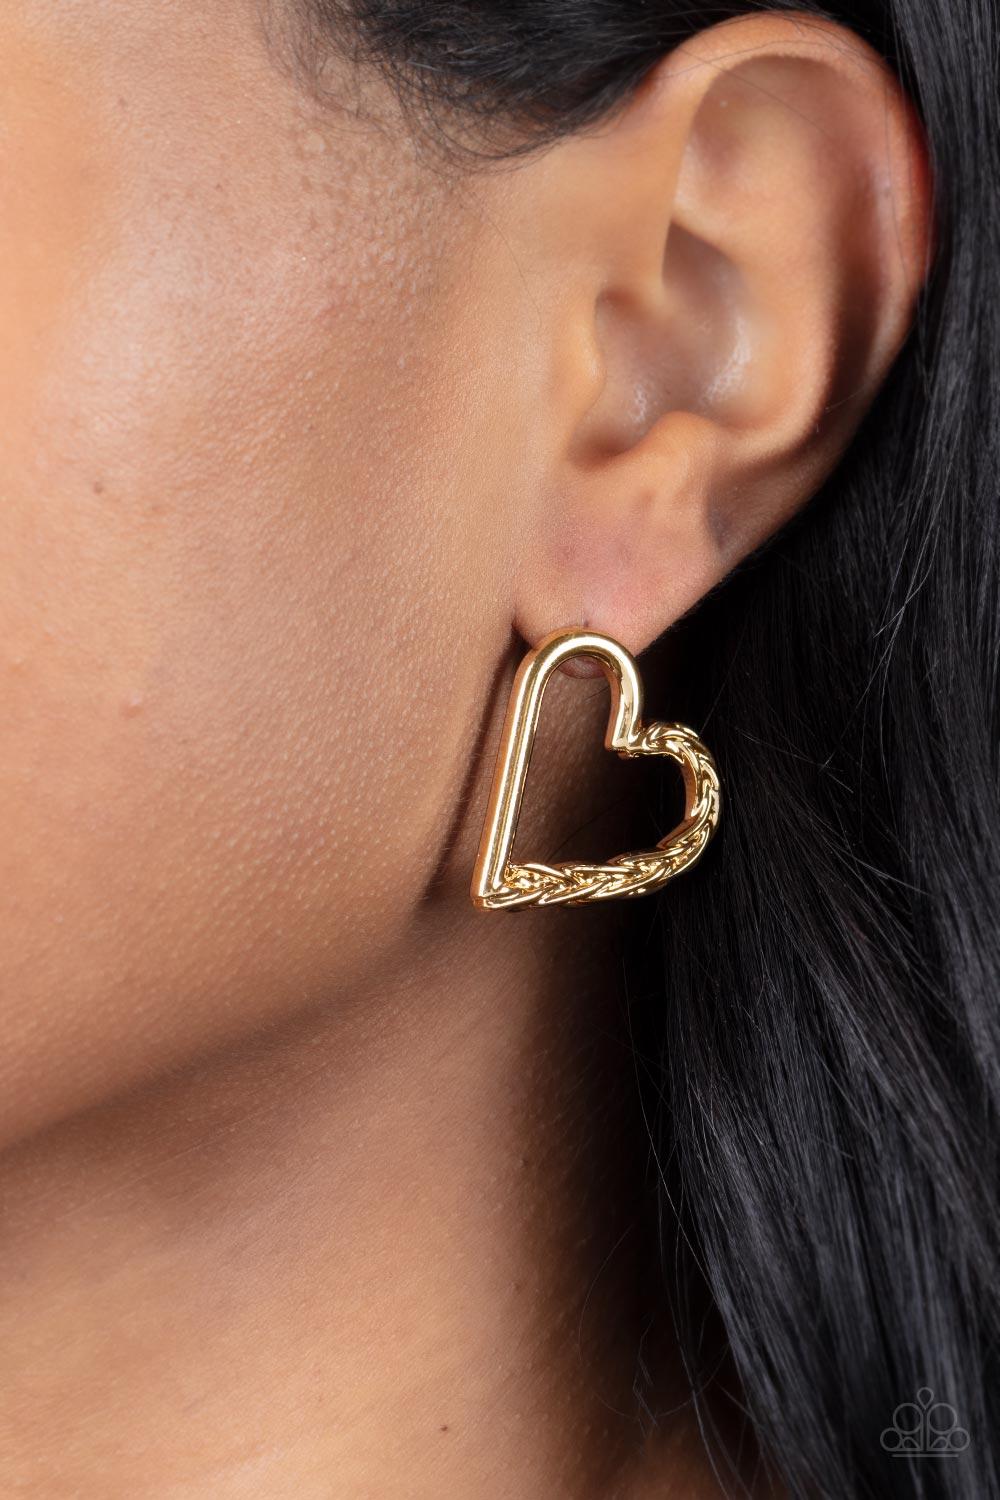 Cupid, Who? Gold Post Earring - Paparazzi Accessories  One side of a glistening gold heart frame is subtlety twisted with twinkly texture, creating a romantic display. Earring attaches to a standard post fitting.  All Paparazzi Accessories are lead free and nickel free!  Sold as one pair of post earrings.